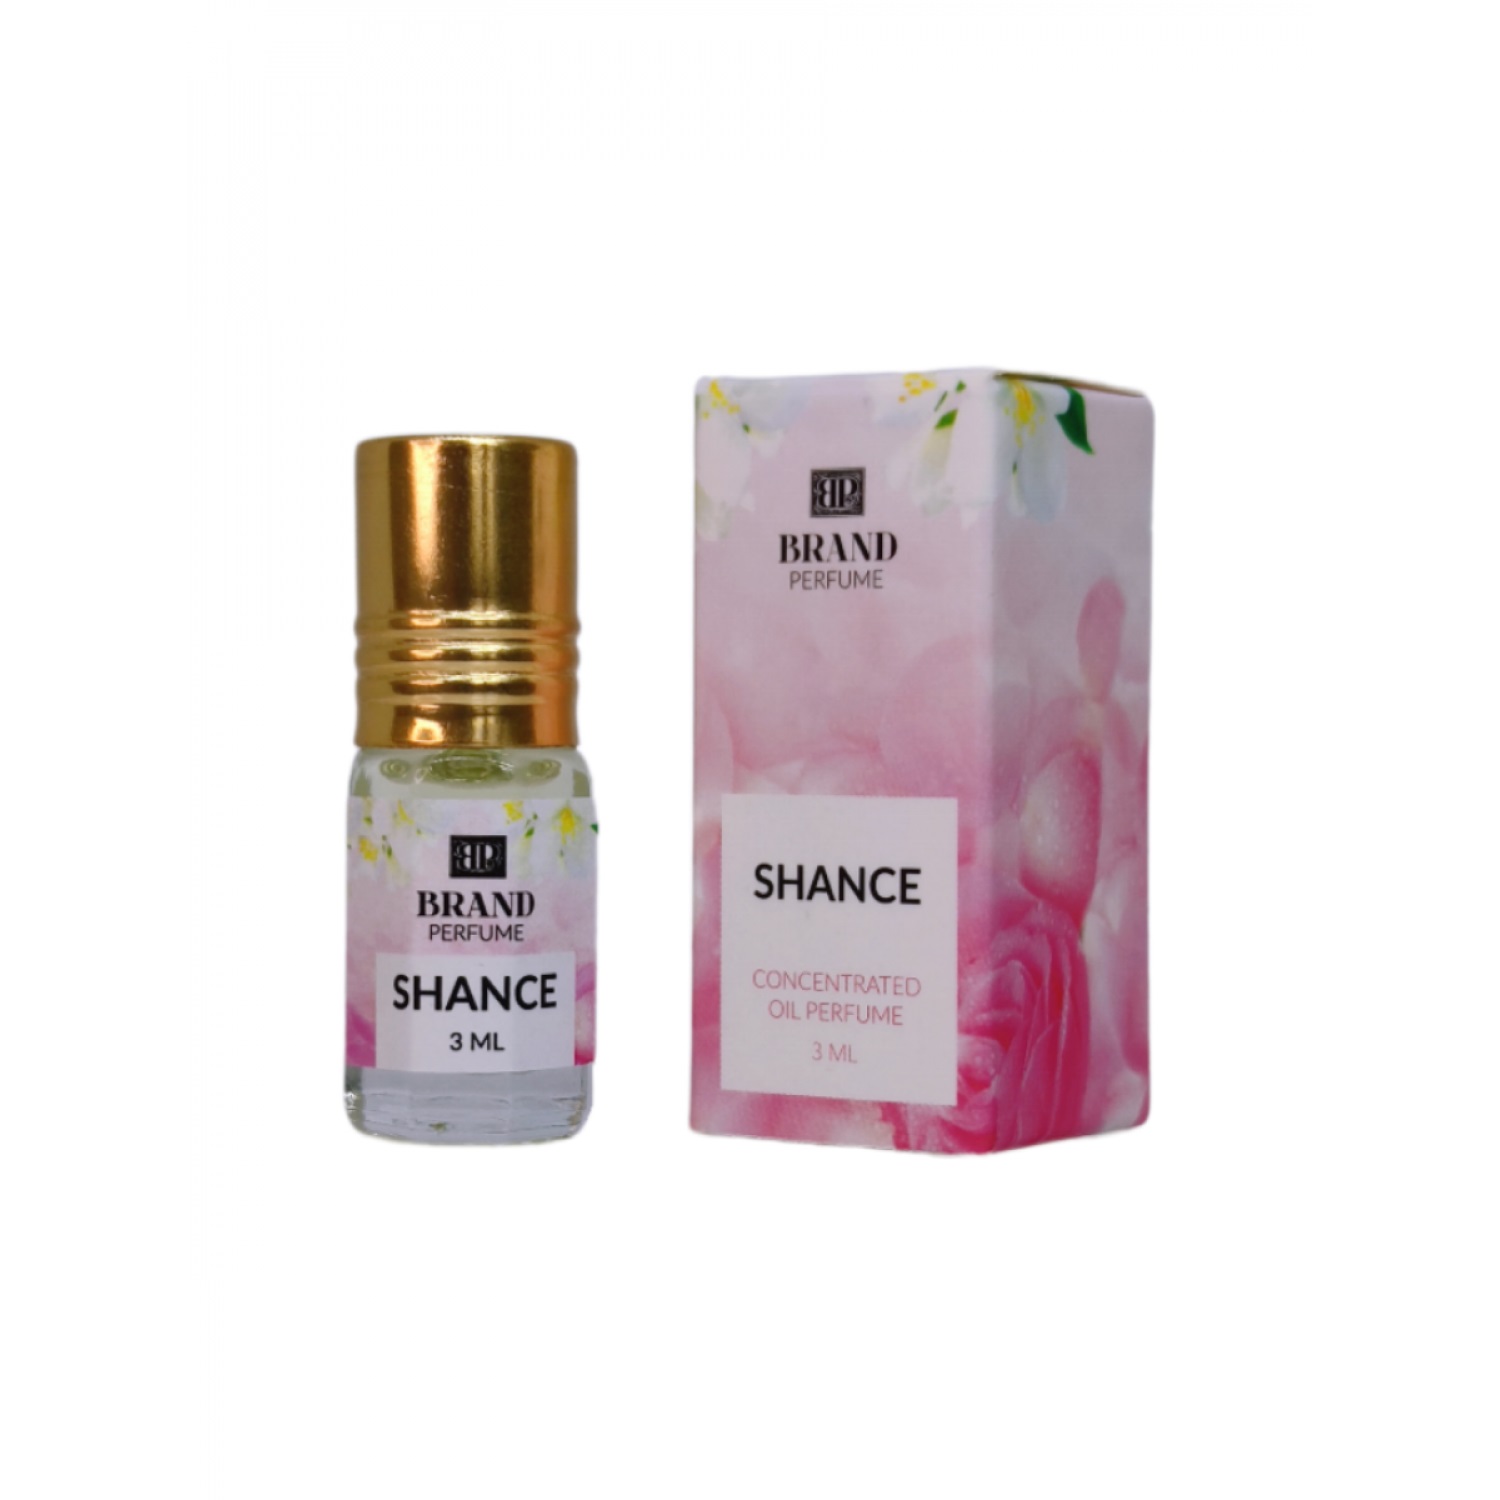 SHANCE Concentrated Oil Perfume, Brand Perfume (Концентрированные масляные духи), ролик, 3 мл.